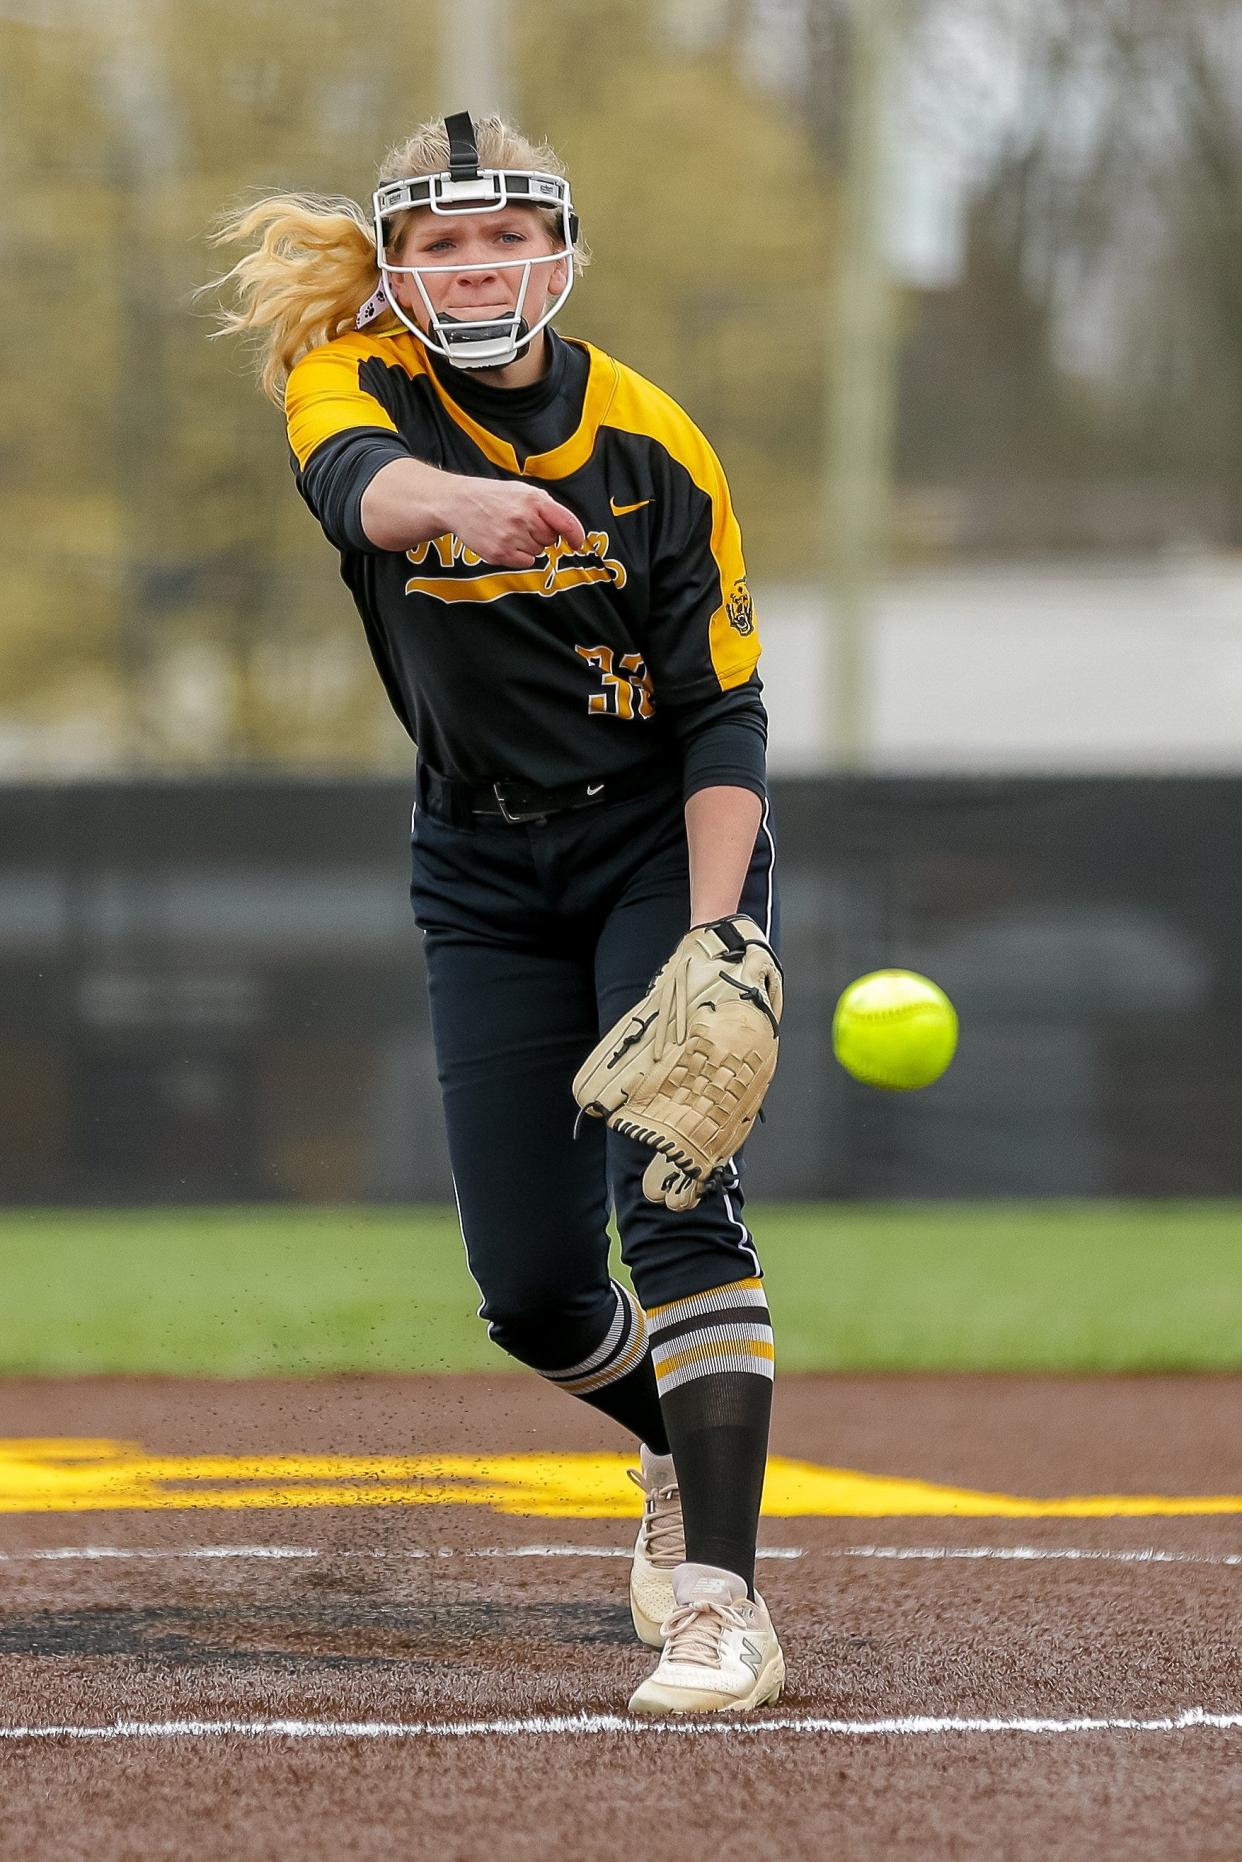 Junior Ayva Lasley delivered a strong season for Upper Arlington, batting .391 with 24 RBI and leading the team in home runs with five. The Golden Bears finished 21-7.